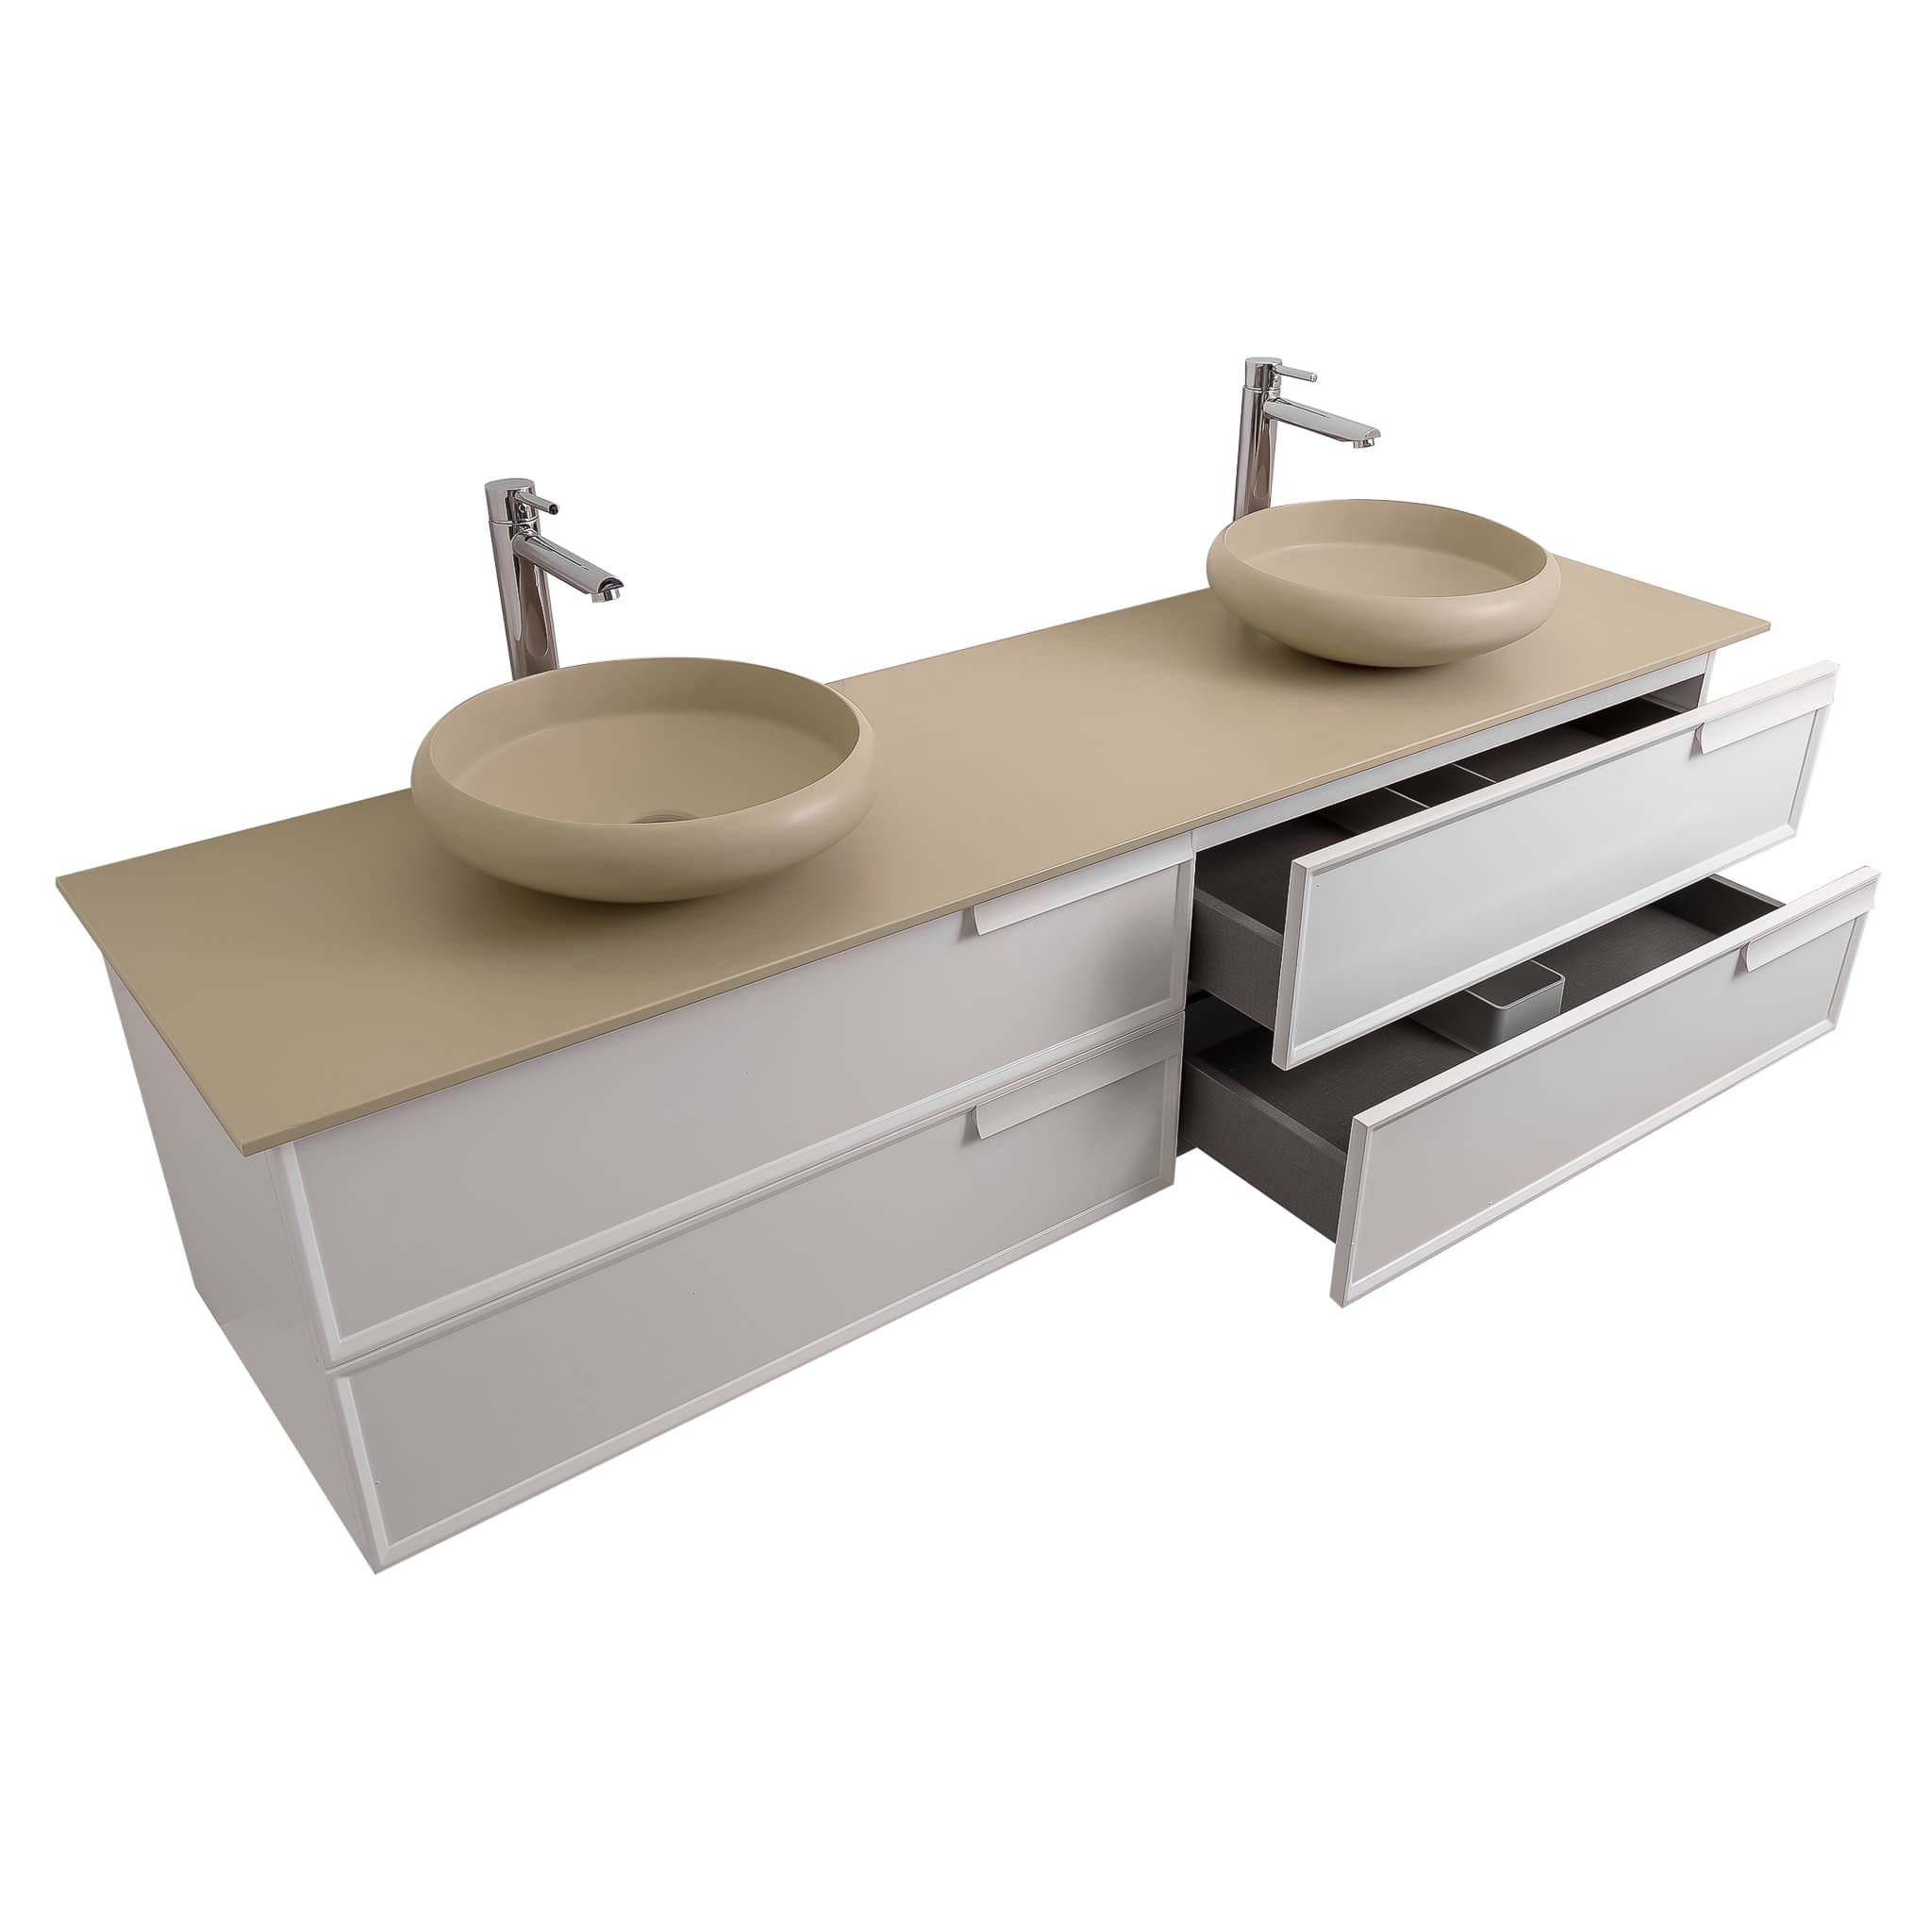 Garda 63 Matte White Cabinet, Solid Surface Flat Taupe Counter and Two Round Solid Surface Taupe Basin 1153, Wall Mounted Modern Vanity Set